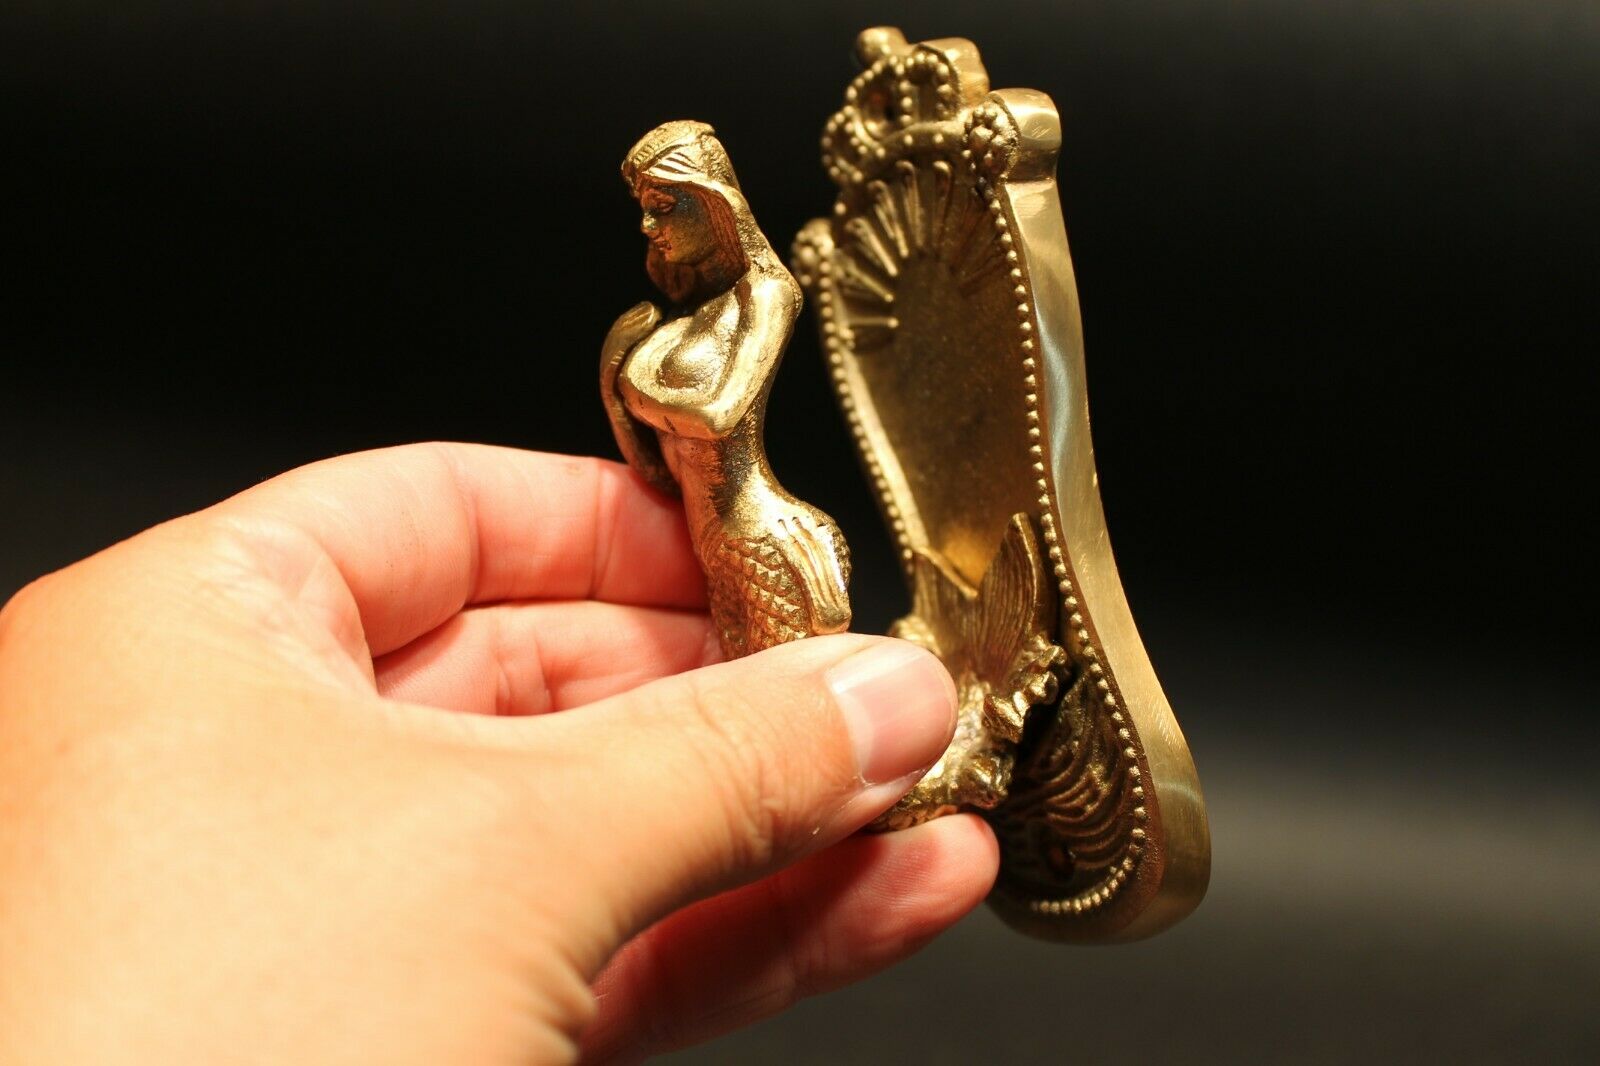 Brass Mermaid Antique Vintage Style Wall Hook - Early Home Decor